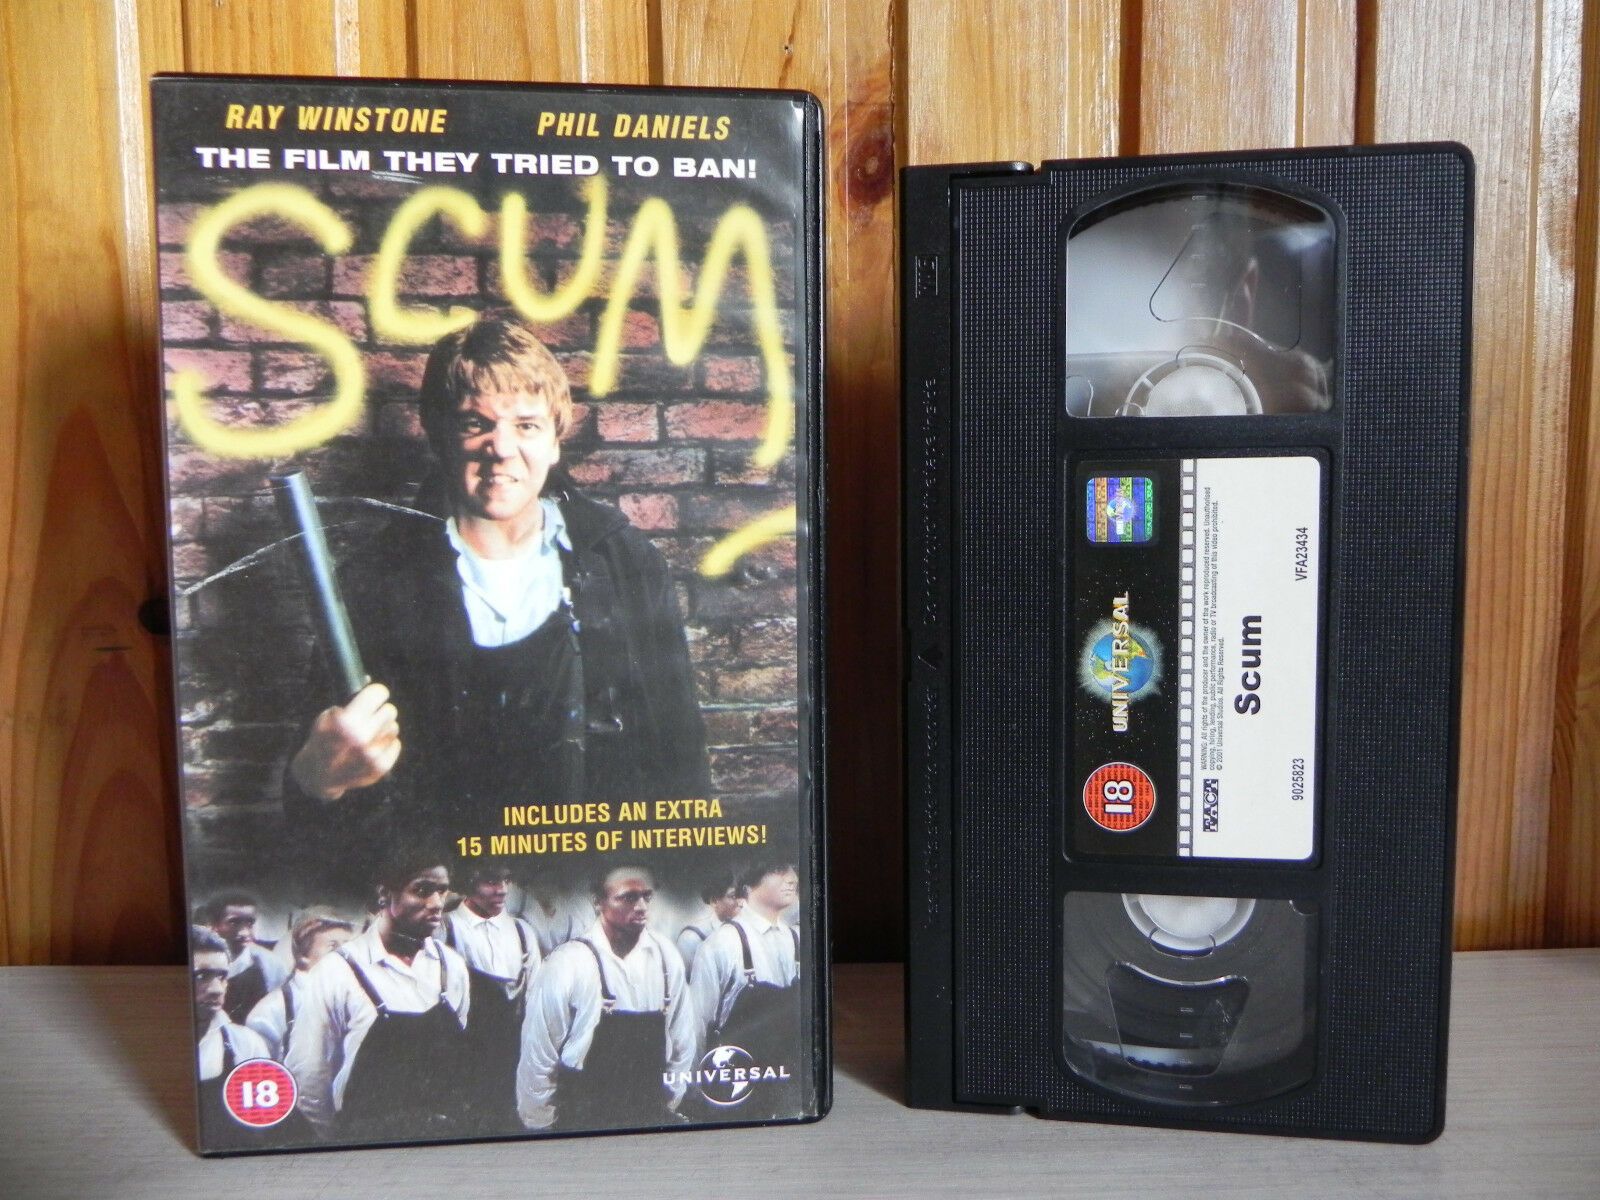 Scum - Universal - Drama - Cert (18) - The Film They Tried To Ban - Pal VHS-